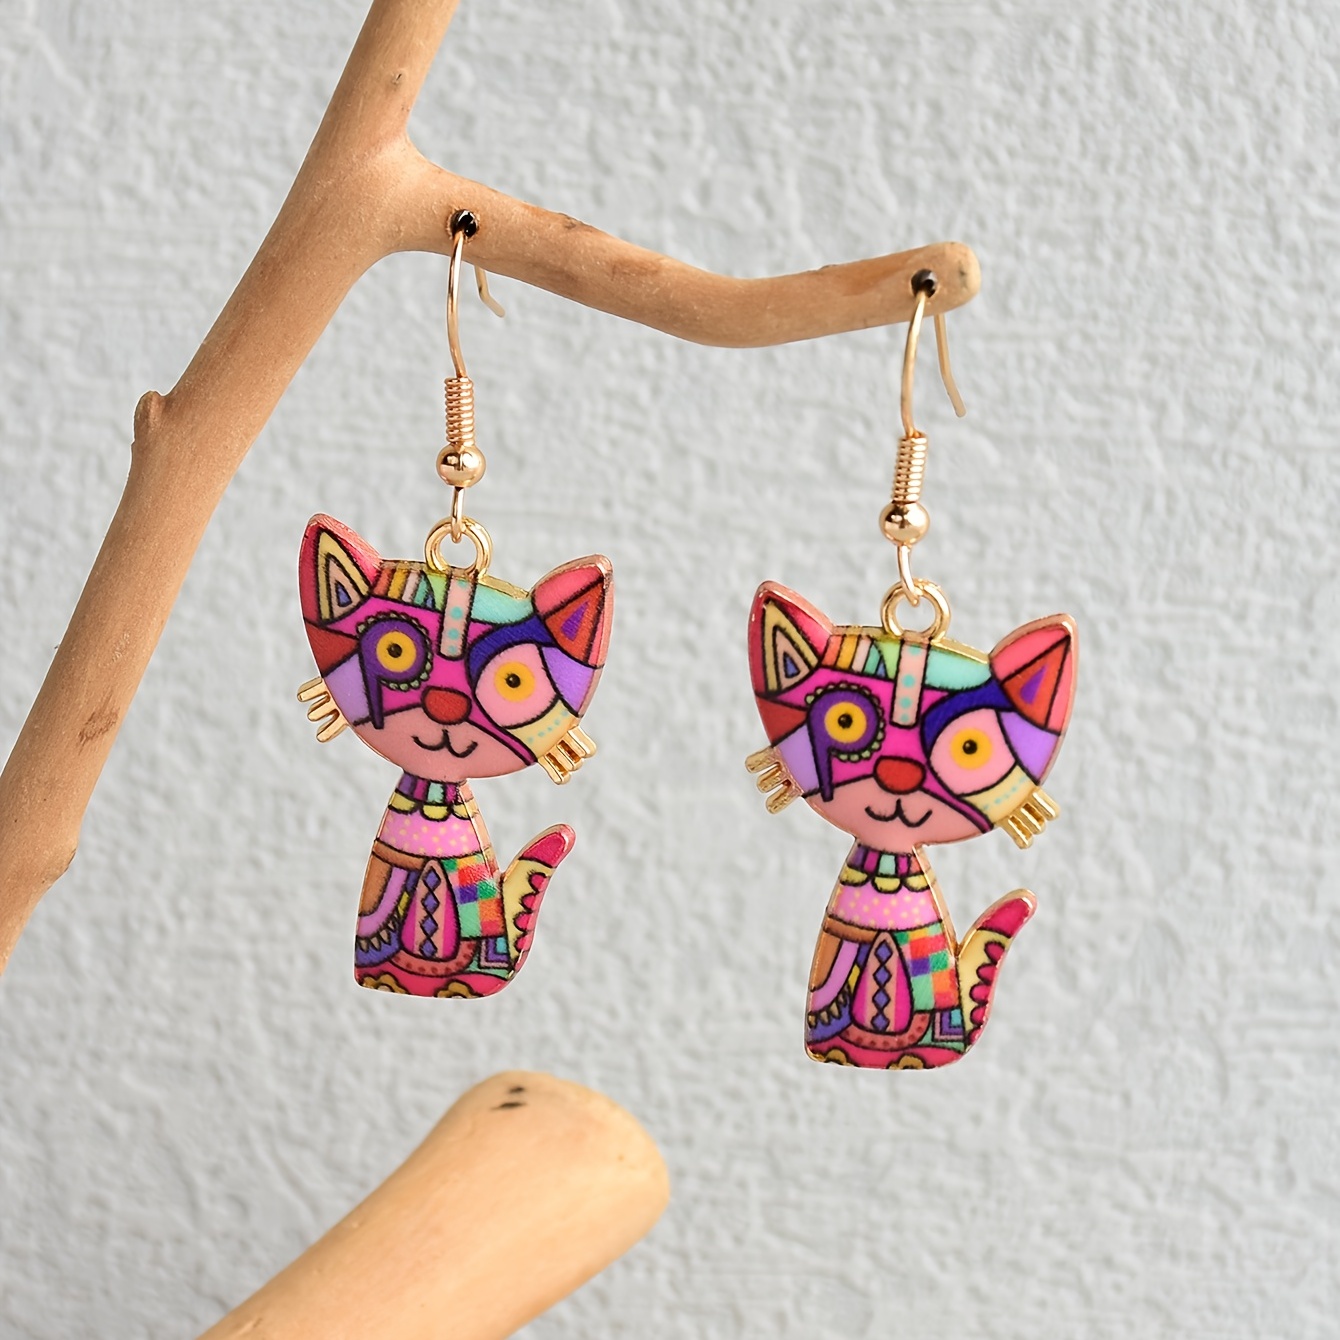 lovely cat design dangle earrings cute cartoon style zinc alloy jewelry adorable gift for women girls daily casual 8